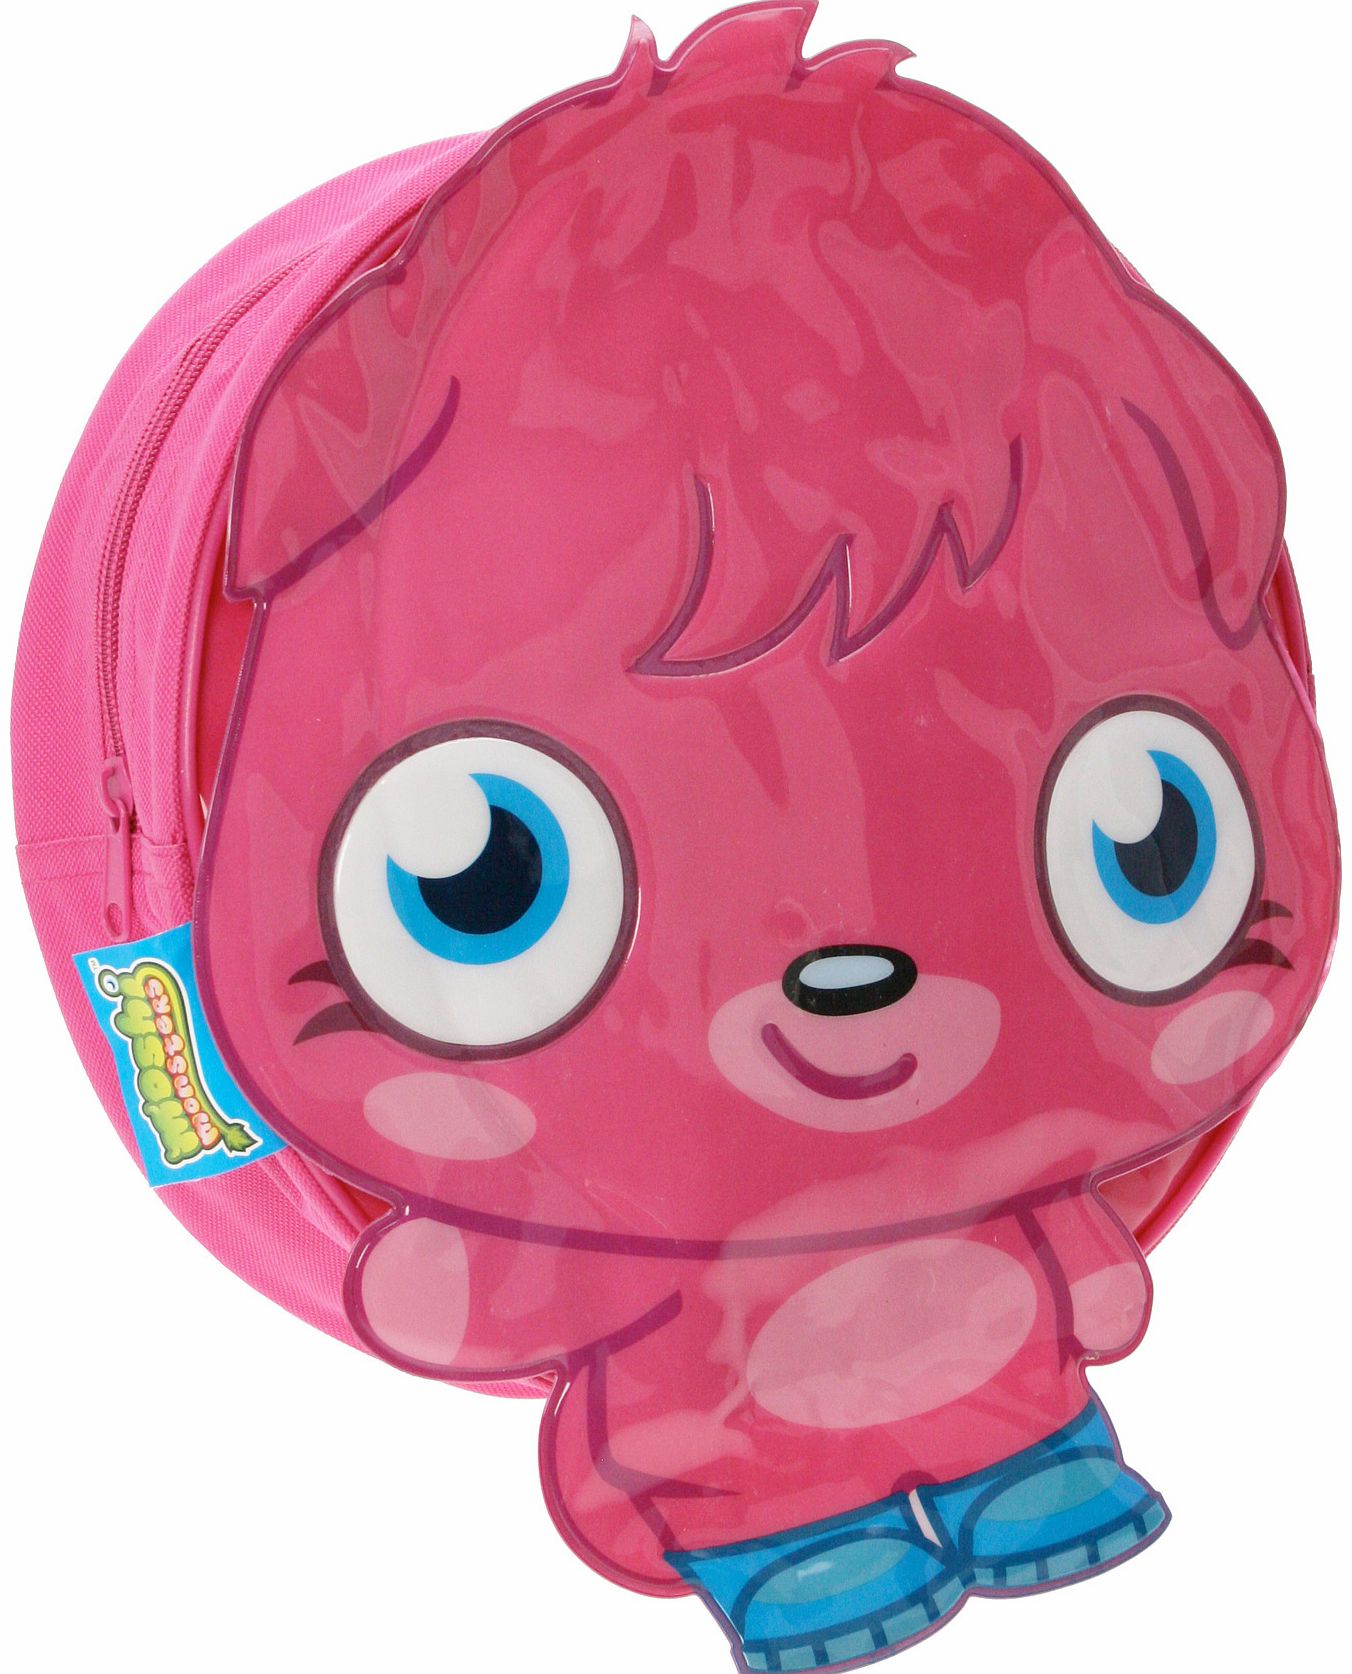 Trademark Collections Moshi Monsters Novelty Backpack